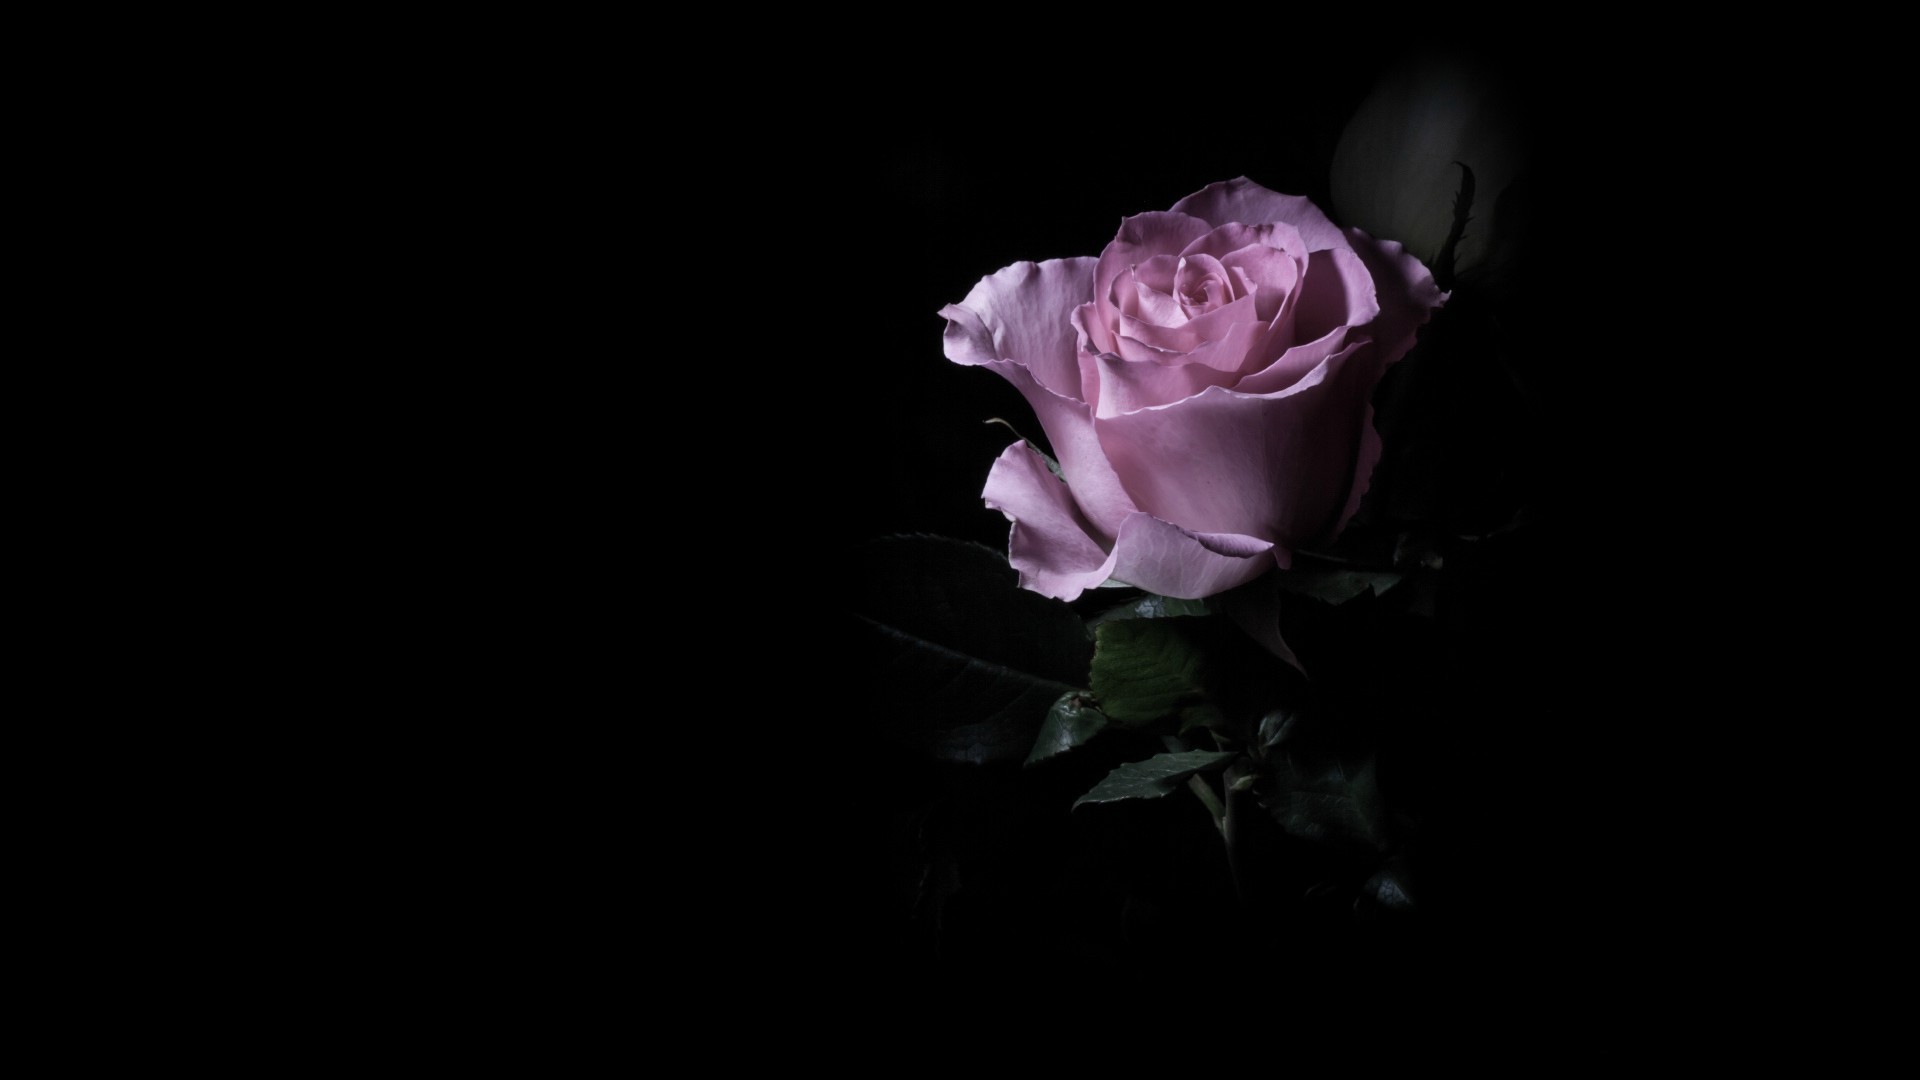 Purple rose in the dark wallpapers and images   wallpapers pictures